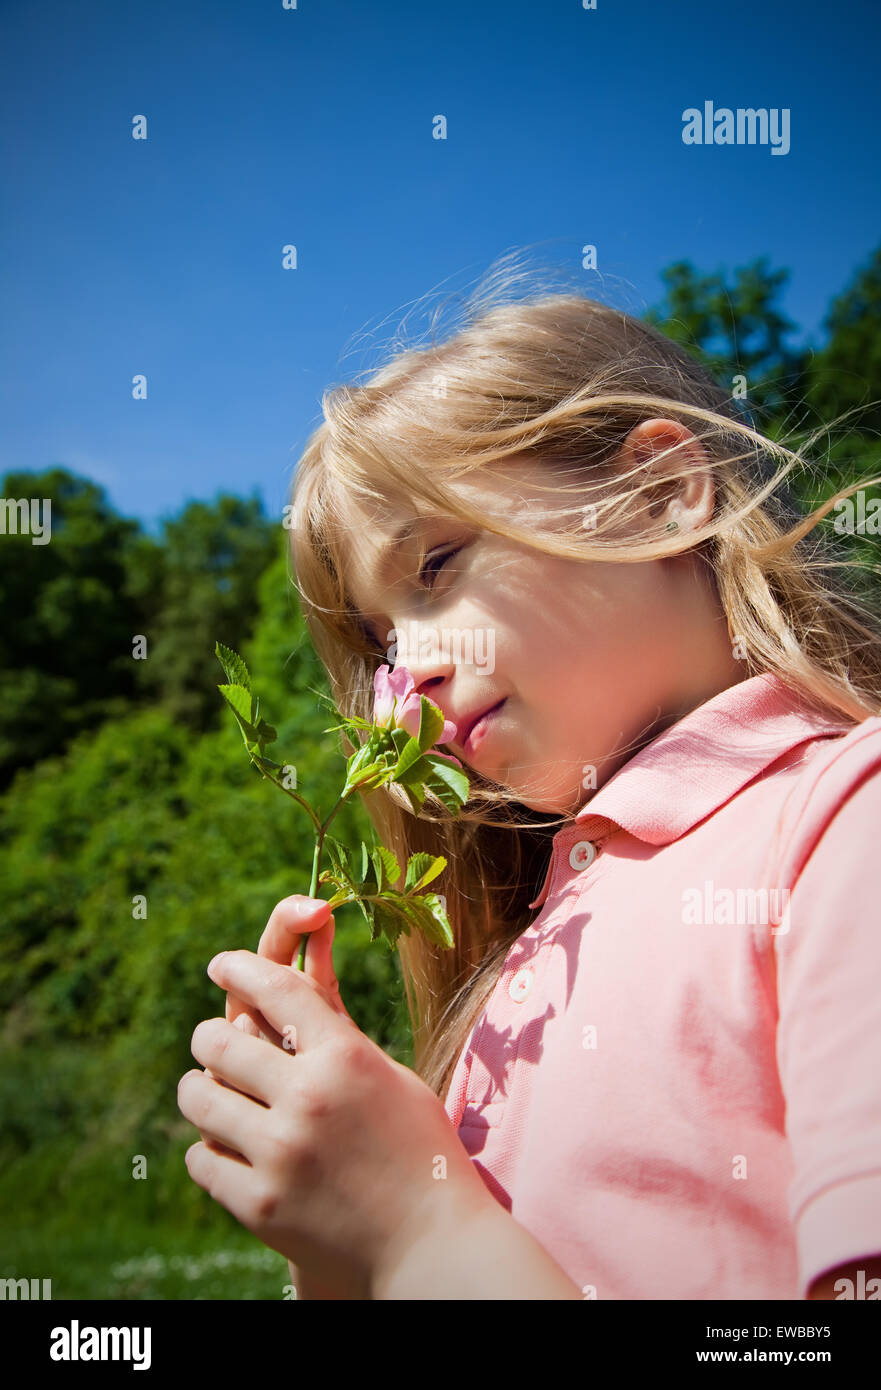 young girl smelling pink blossom Stock Photo